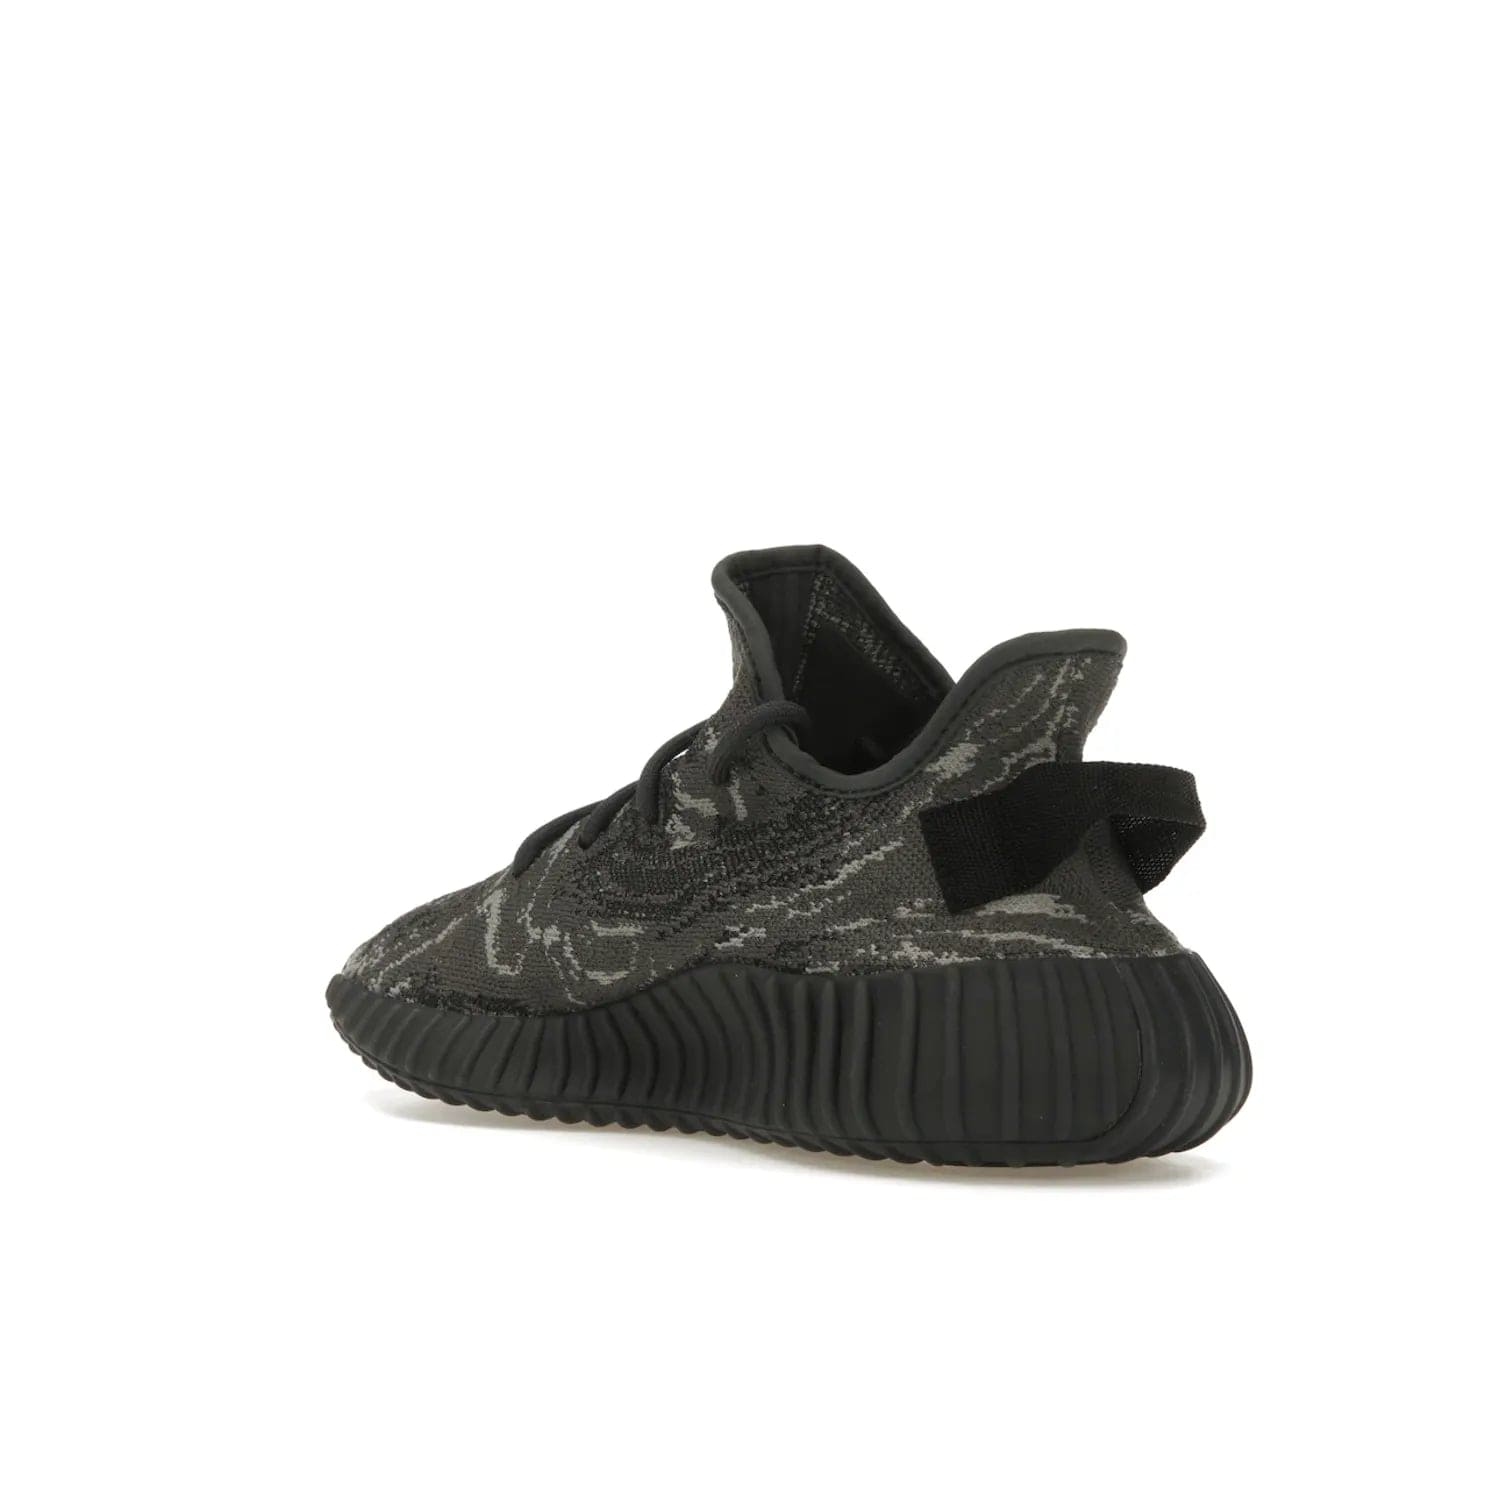 adidas Yeezy Boost 350 V2 MX Dark Salt - Image 24 - Only at www.BallersClubKickz.com - ##
The adidas Yeezy Boost 350 V2 MX Dark Salt offers a contemporary look with a signature combination of grey and black hues. Cushioned Boost midsole and side stripe allow for all day wear. Get the perfect fashion-forward addition with this sleek sneaker for $230.